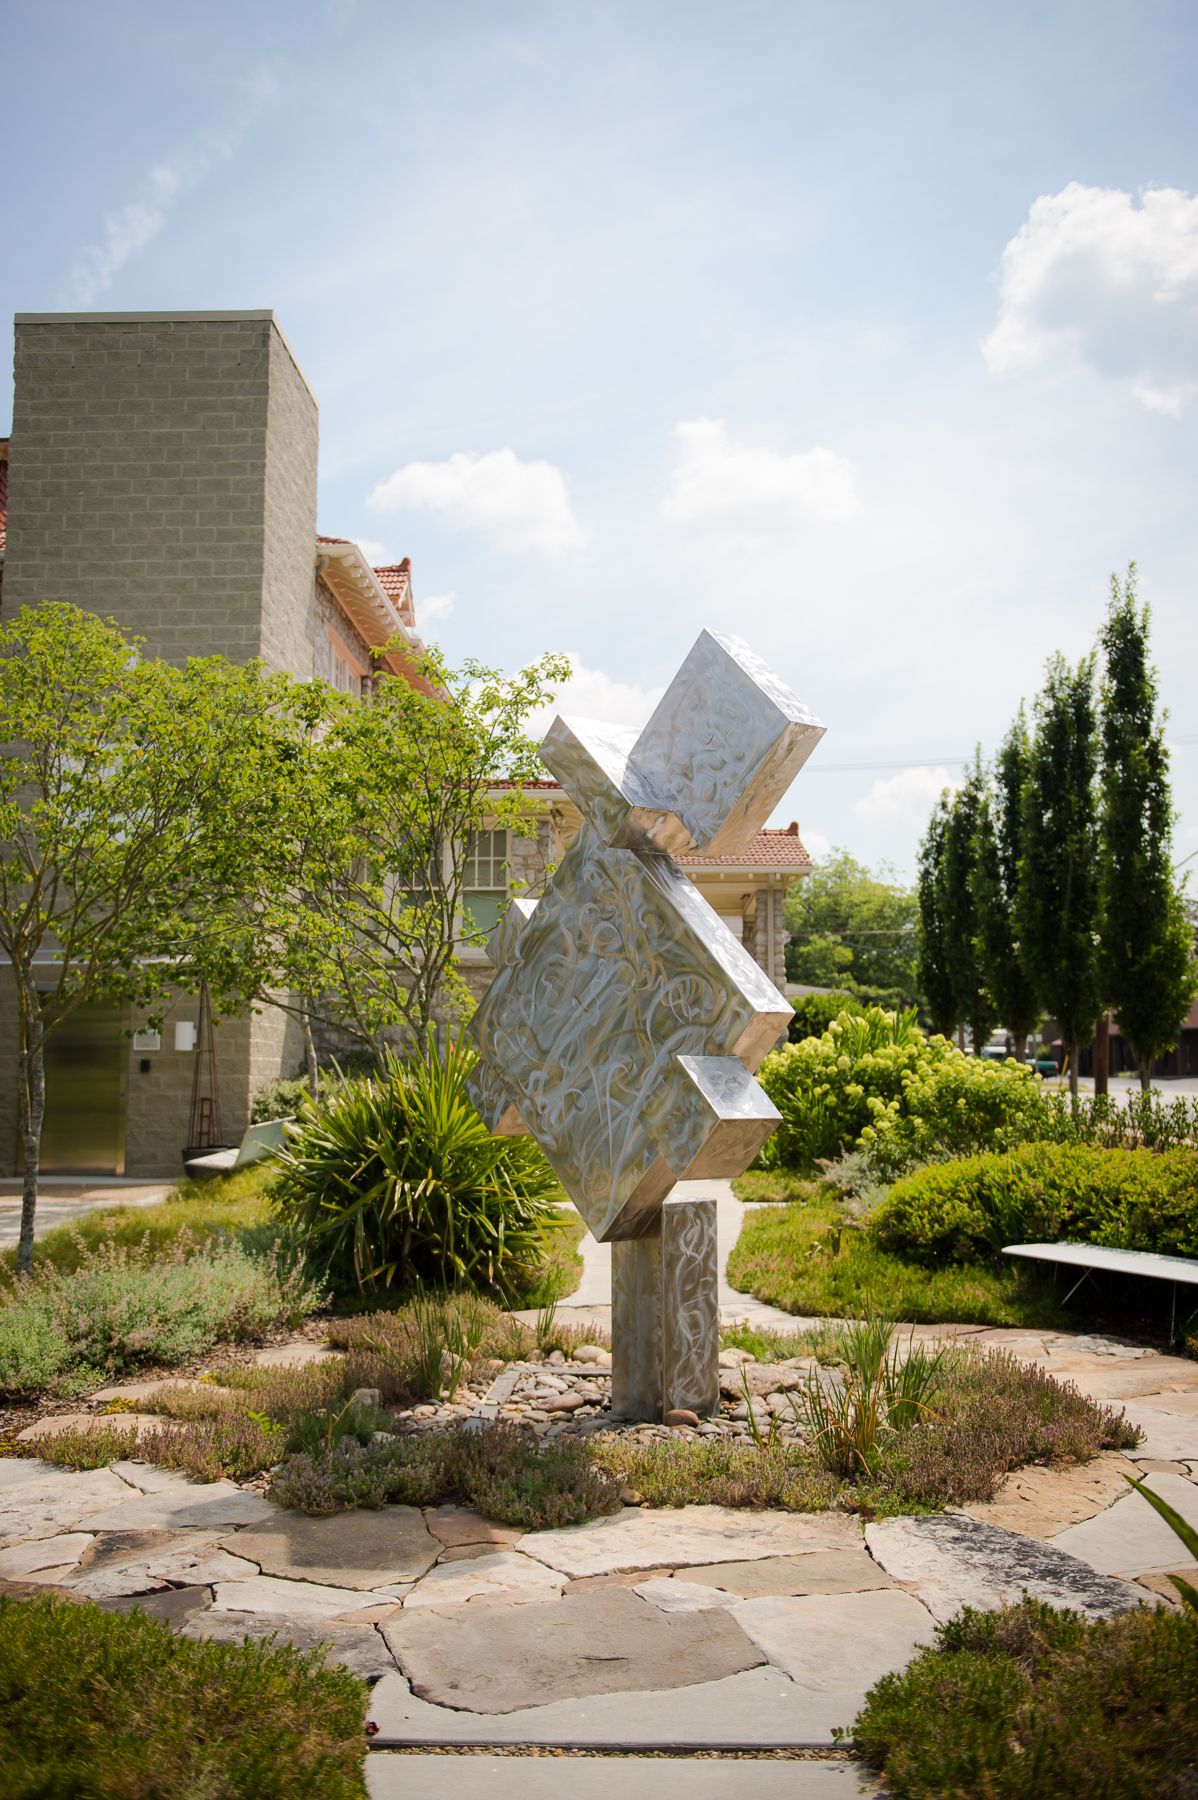 A photograph of the Jitterbug public art sculpture at The Bienenstock Furniture Library.